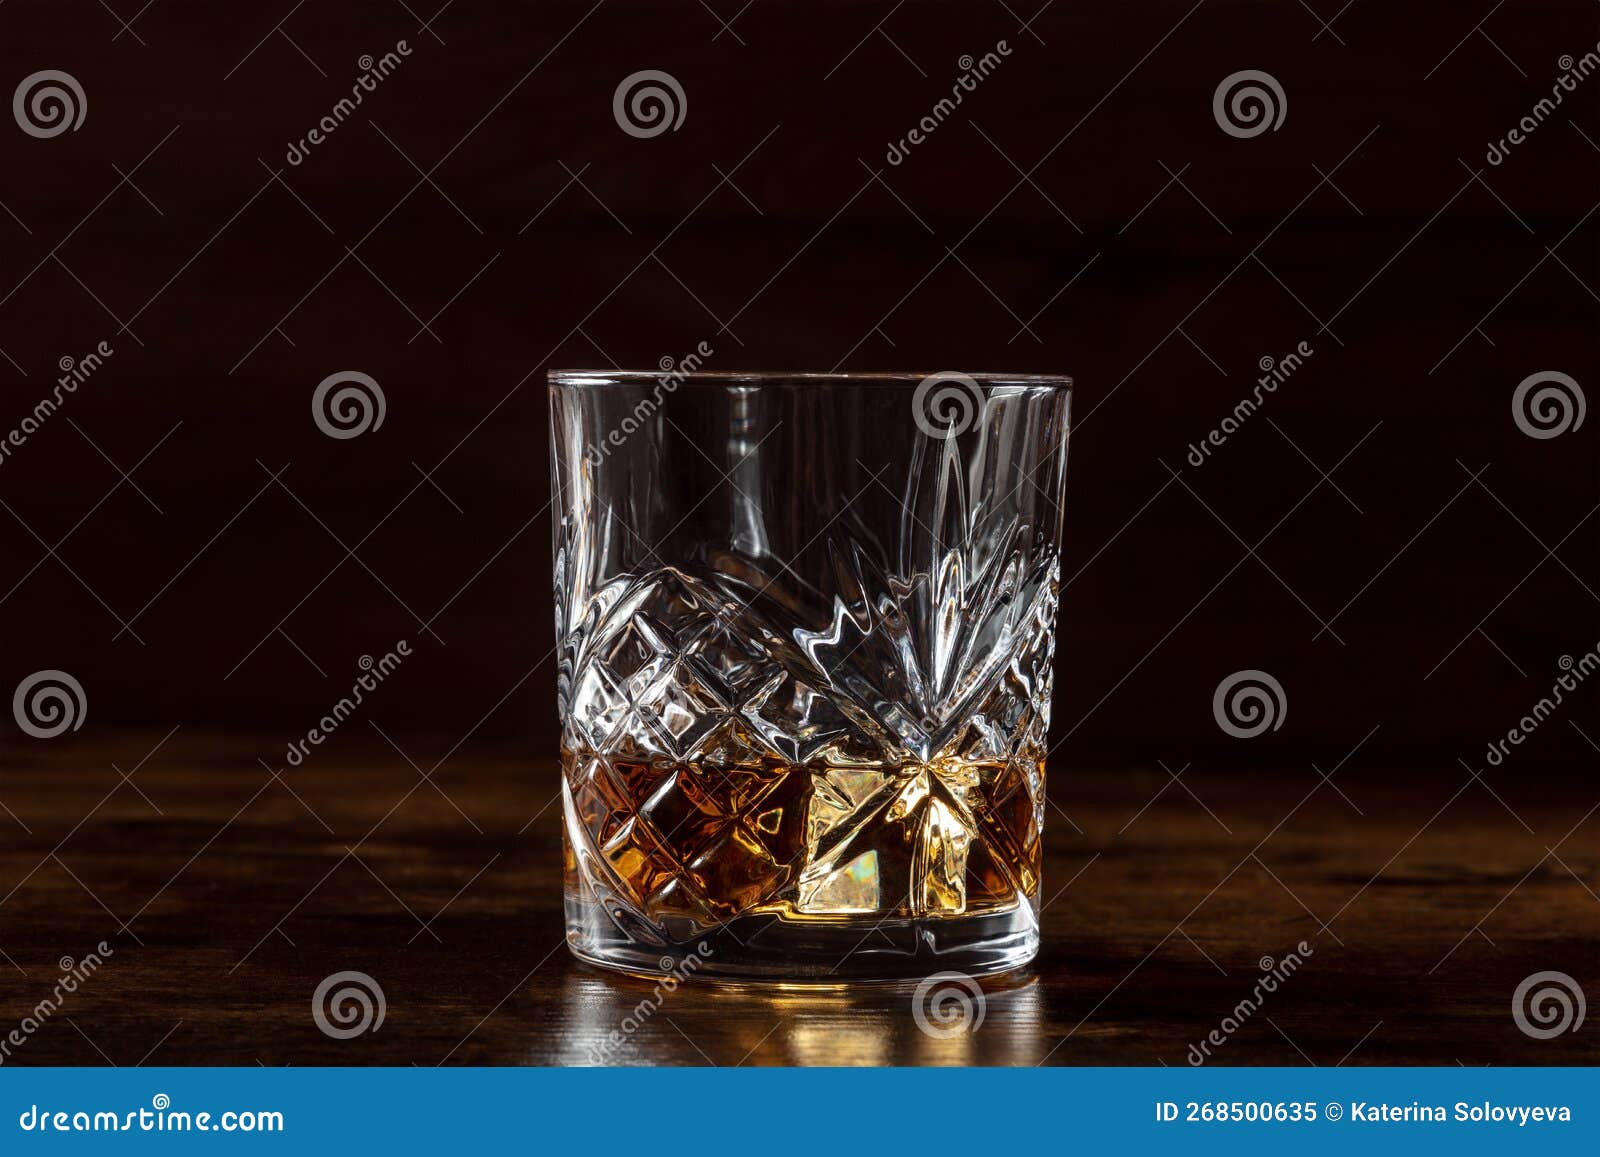 whiskey in a glass with ice. bourbon whisky on rocks on a dark background